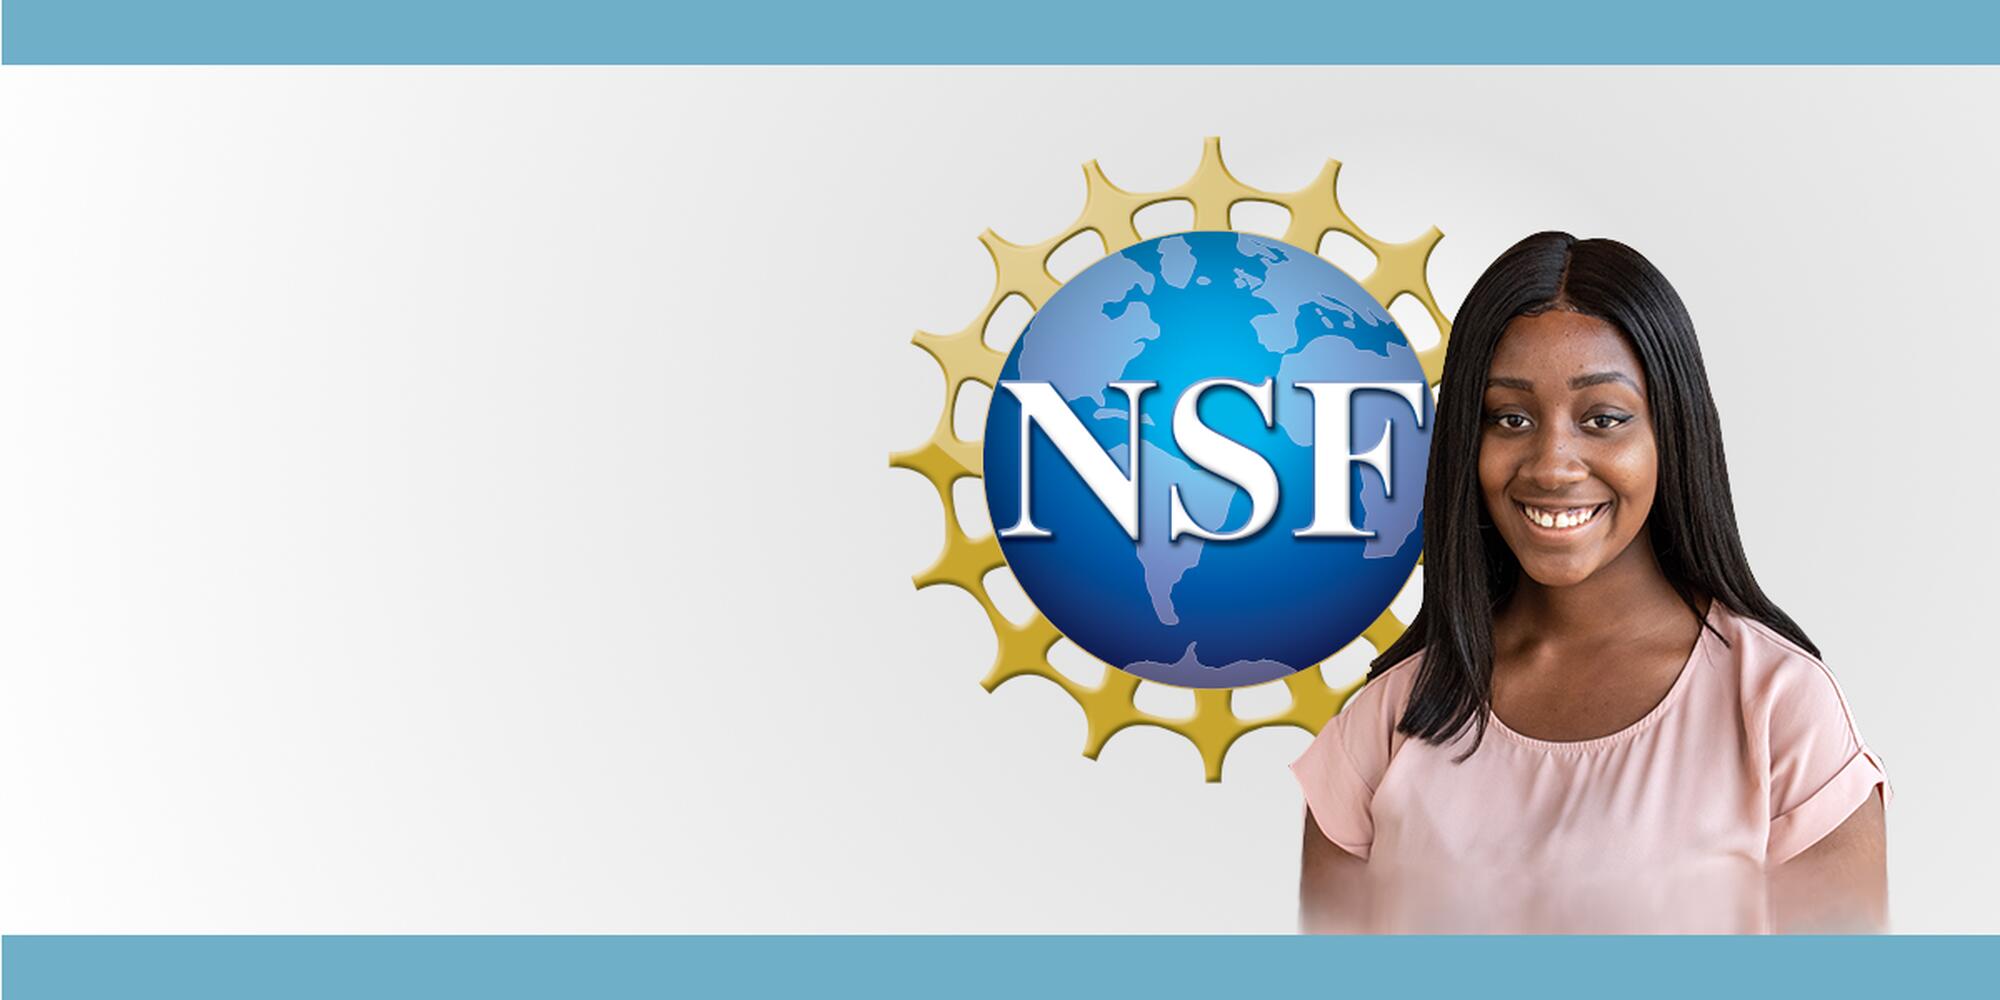 On right side, Mahogany Monette smiling and wearing a pink shirt. Behind her is the NSF logo. Background is a greyish white color with blue border on the top and bottom of the image.